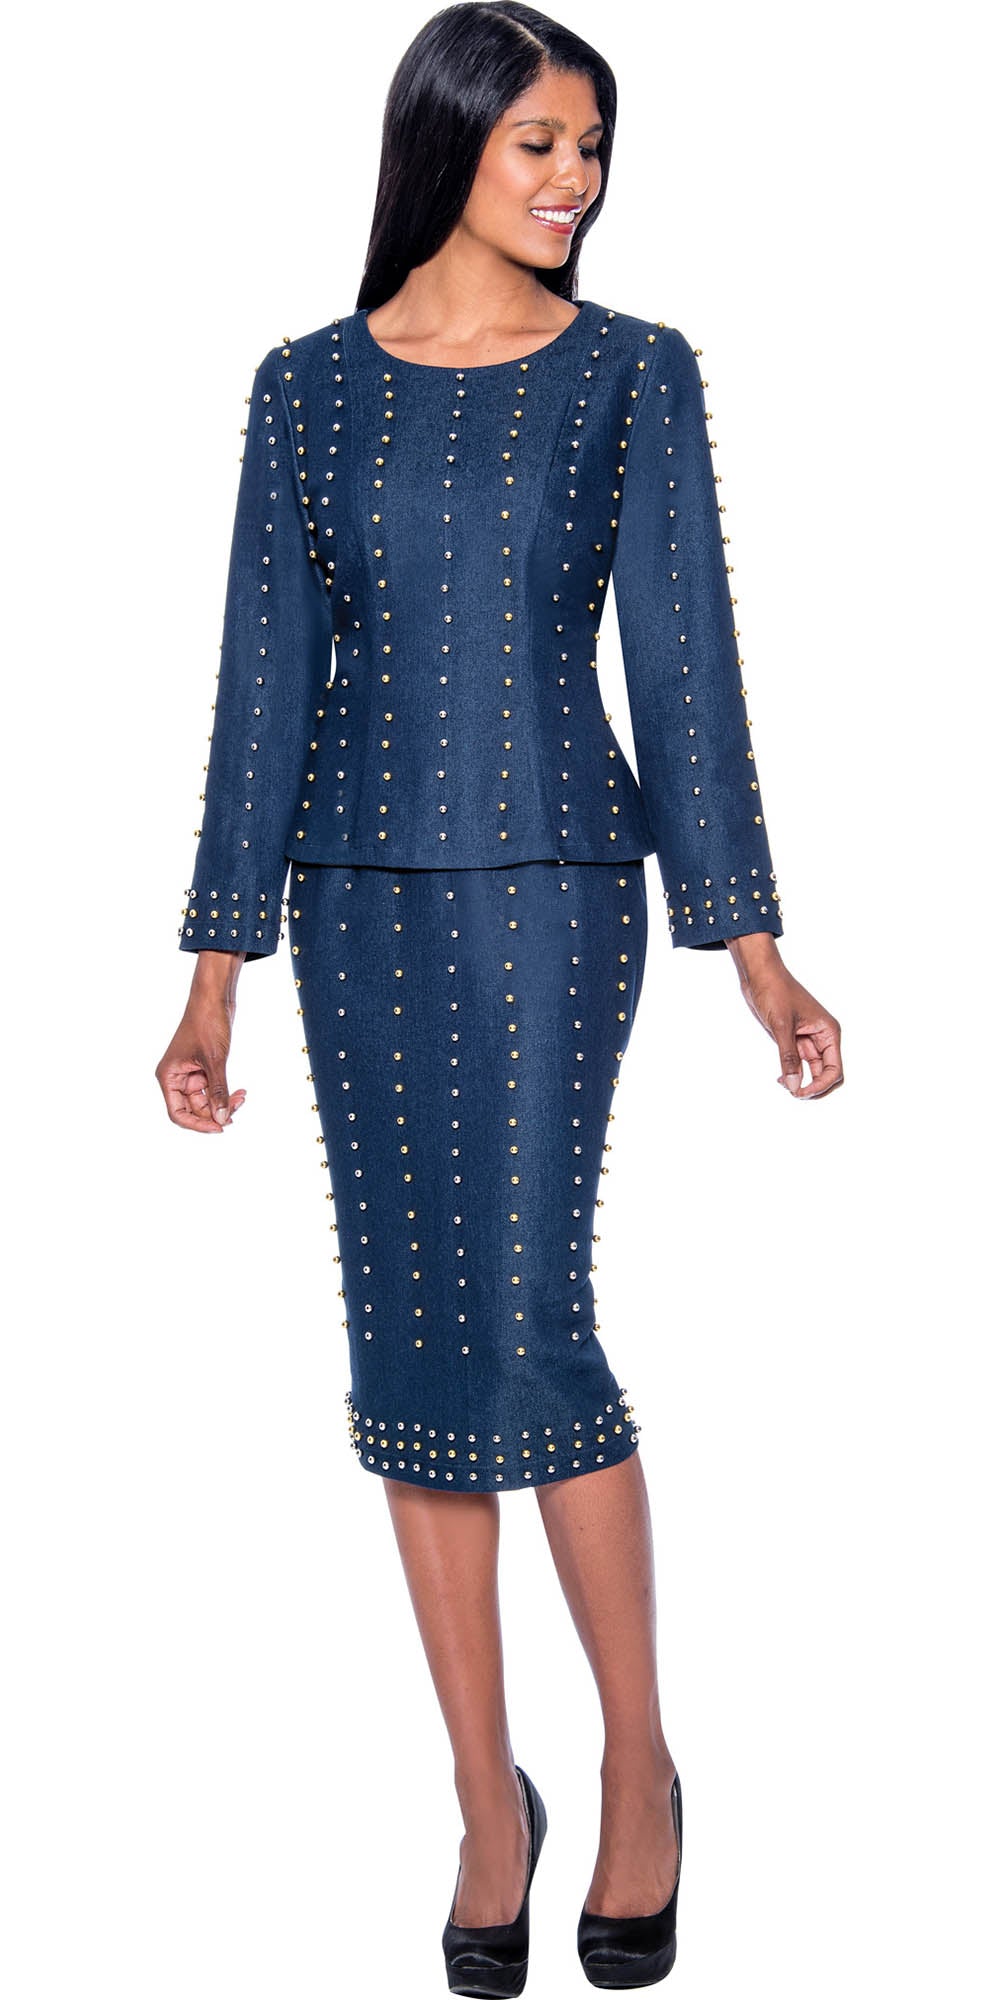 Devine Sport DS63672 - Navy Soft Stretch Denim Skirt Suit With Metallic Pearling